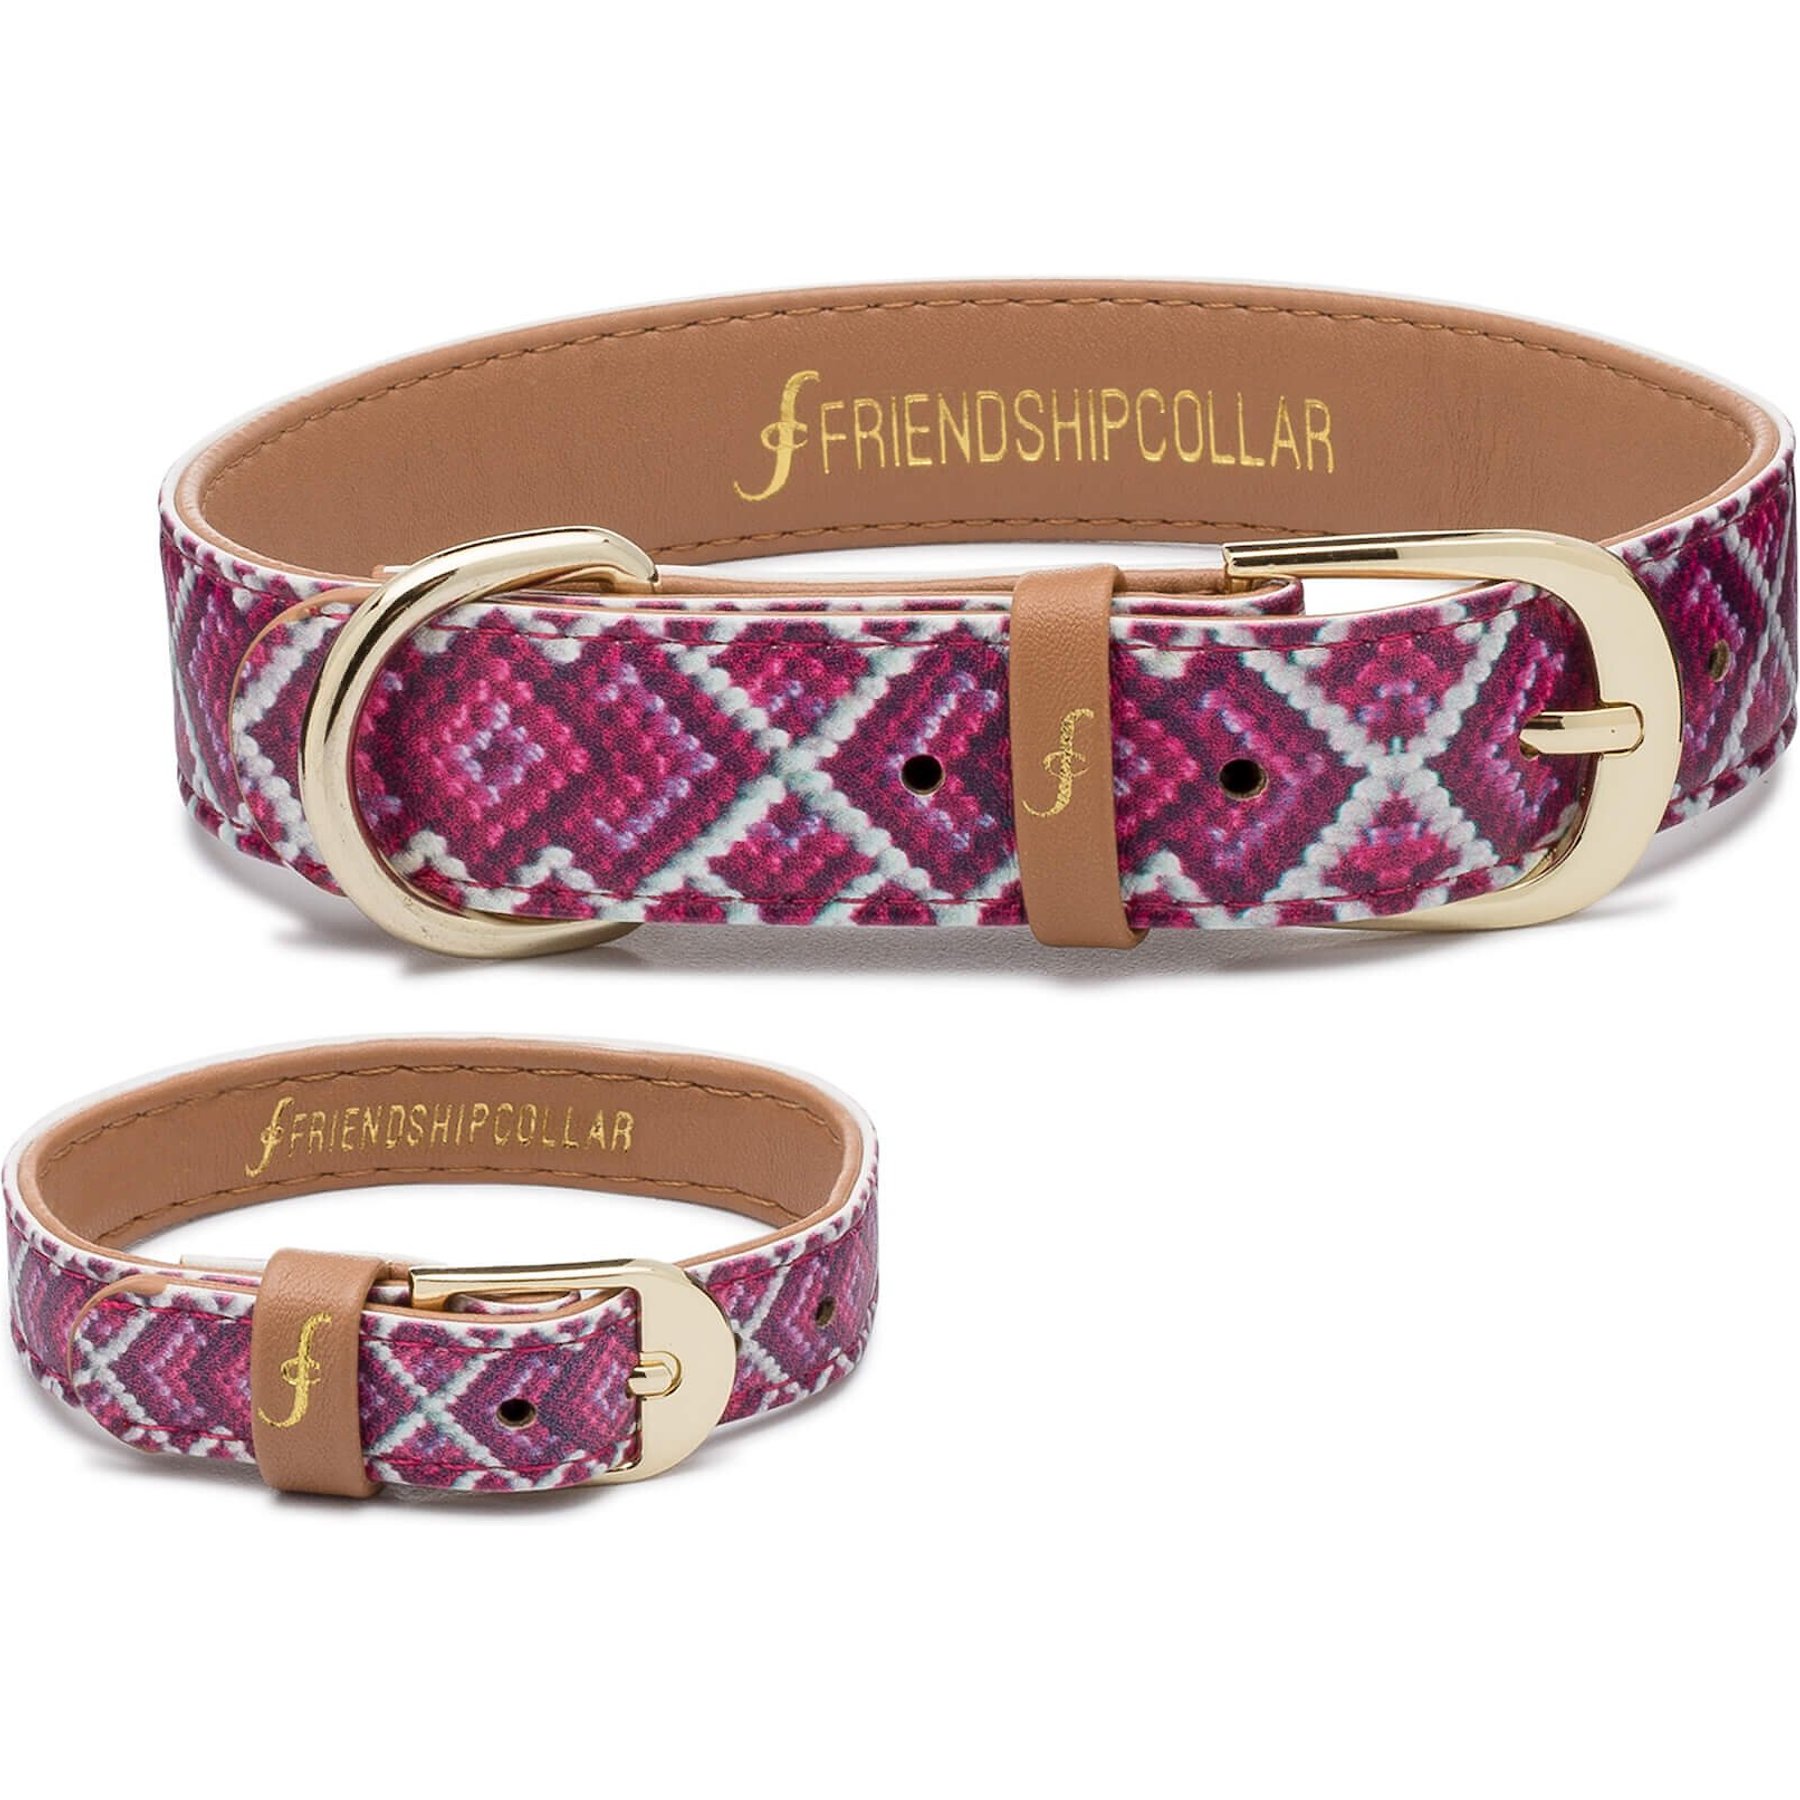 FRIENDSHIPCOLLAR Puppy Love Leather Dog Collar with Friendship Bracelet,  Large: 17 to 20-in neck, 1-in wide 